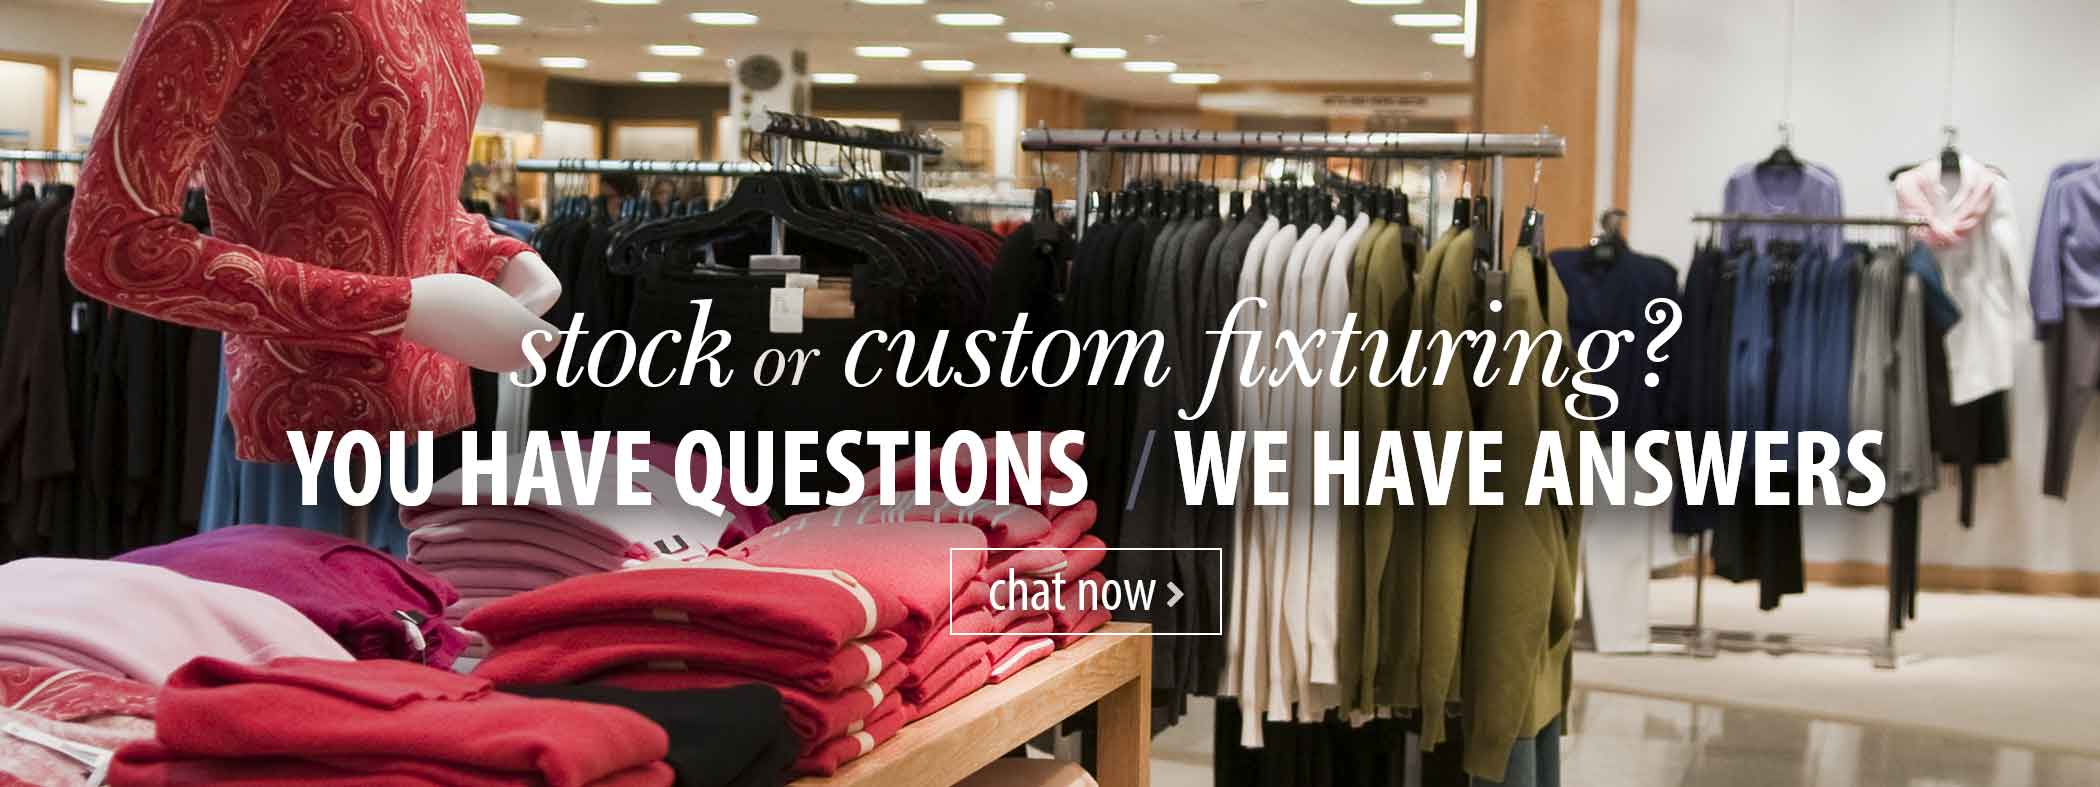 Questions - We have Answers! Chat now